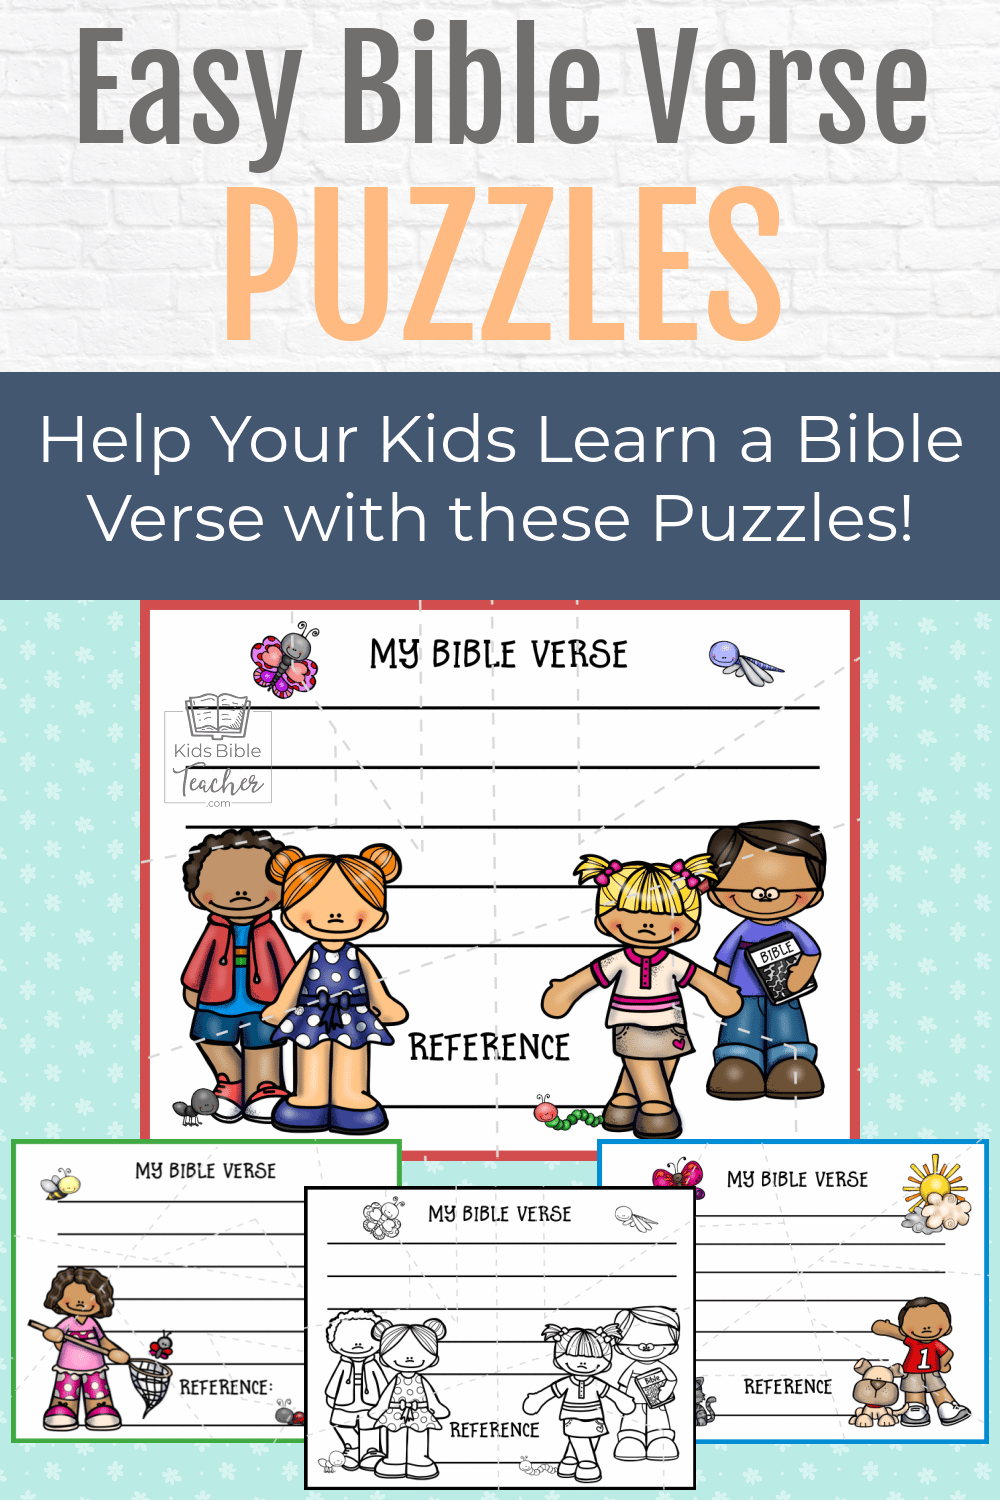 Help your kids memorize a Bible verse with these easy puzzles - perfect for little hands! These free puzzles come in full color or black and white outline so your kids can color their own.